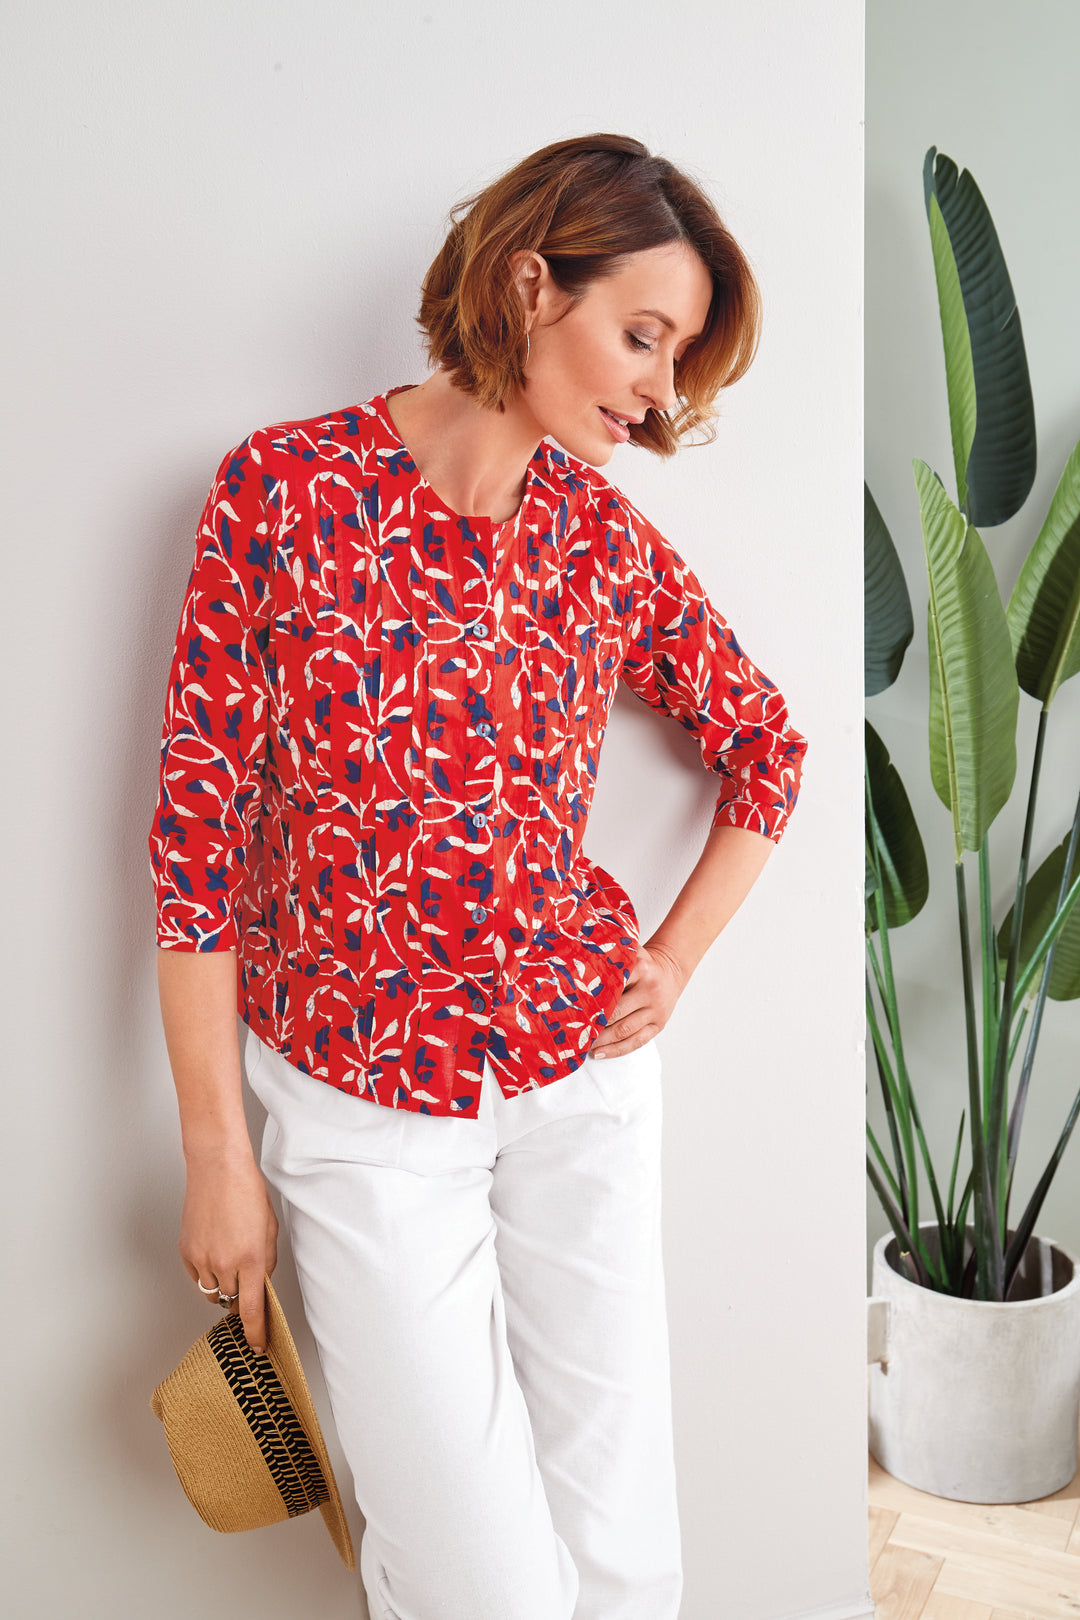 Lily Ella Collection red floral blouse with 3/4 sleeves, stylish women's fashion, paired with white trousers and straw clutch, modern casual elegant look